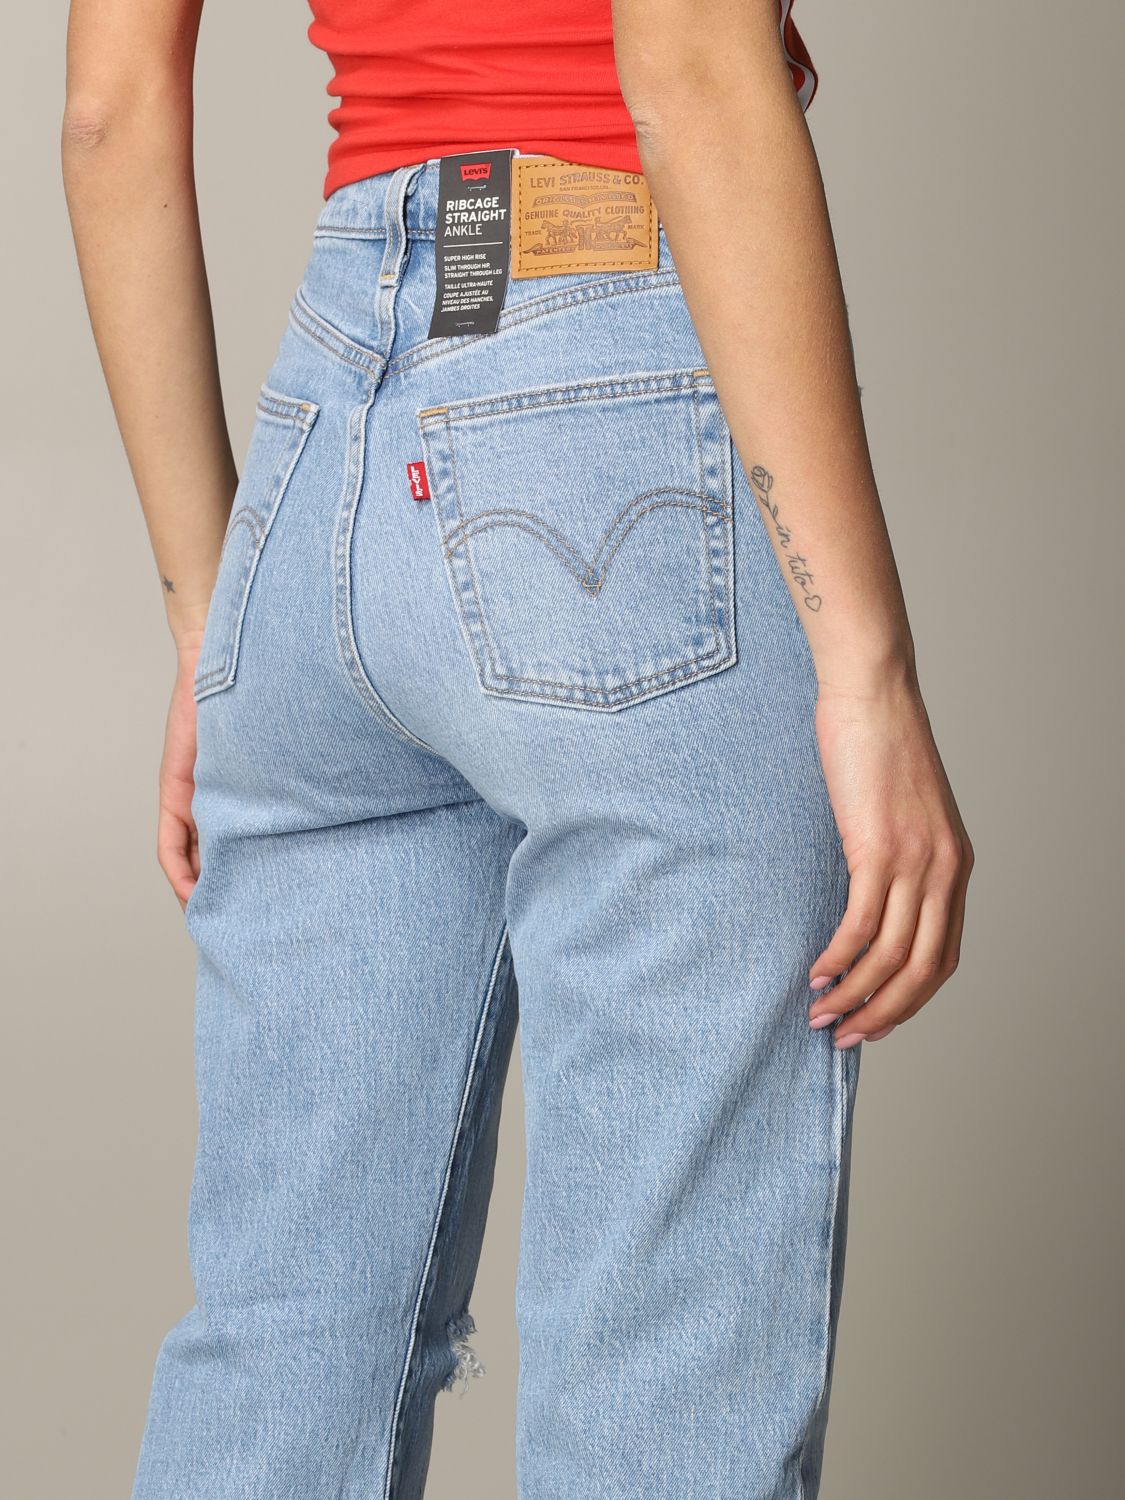 high waisted jeans levis uk